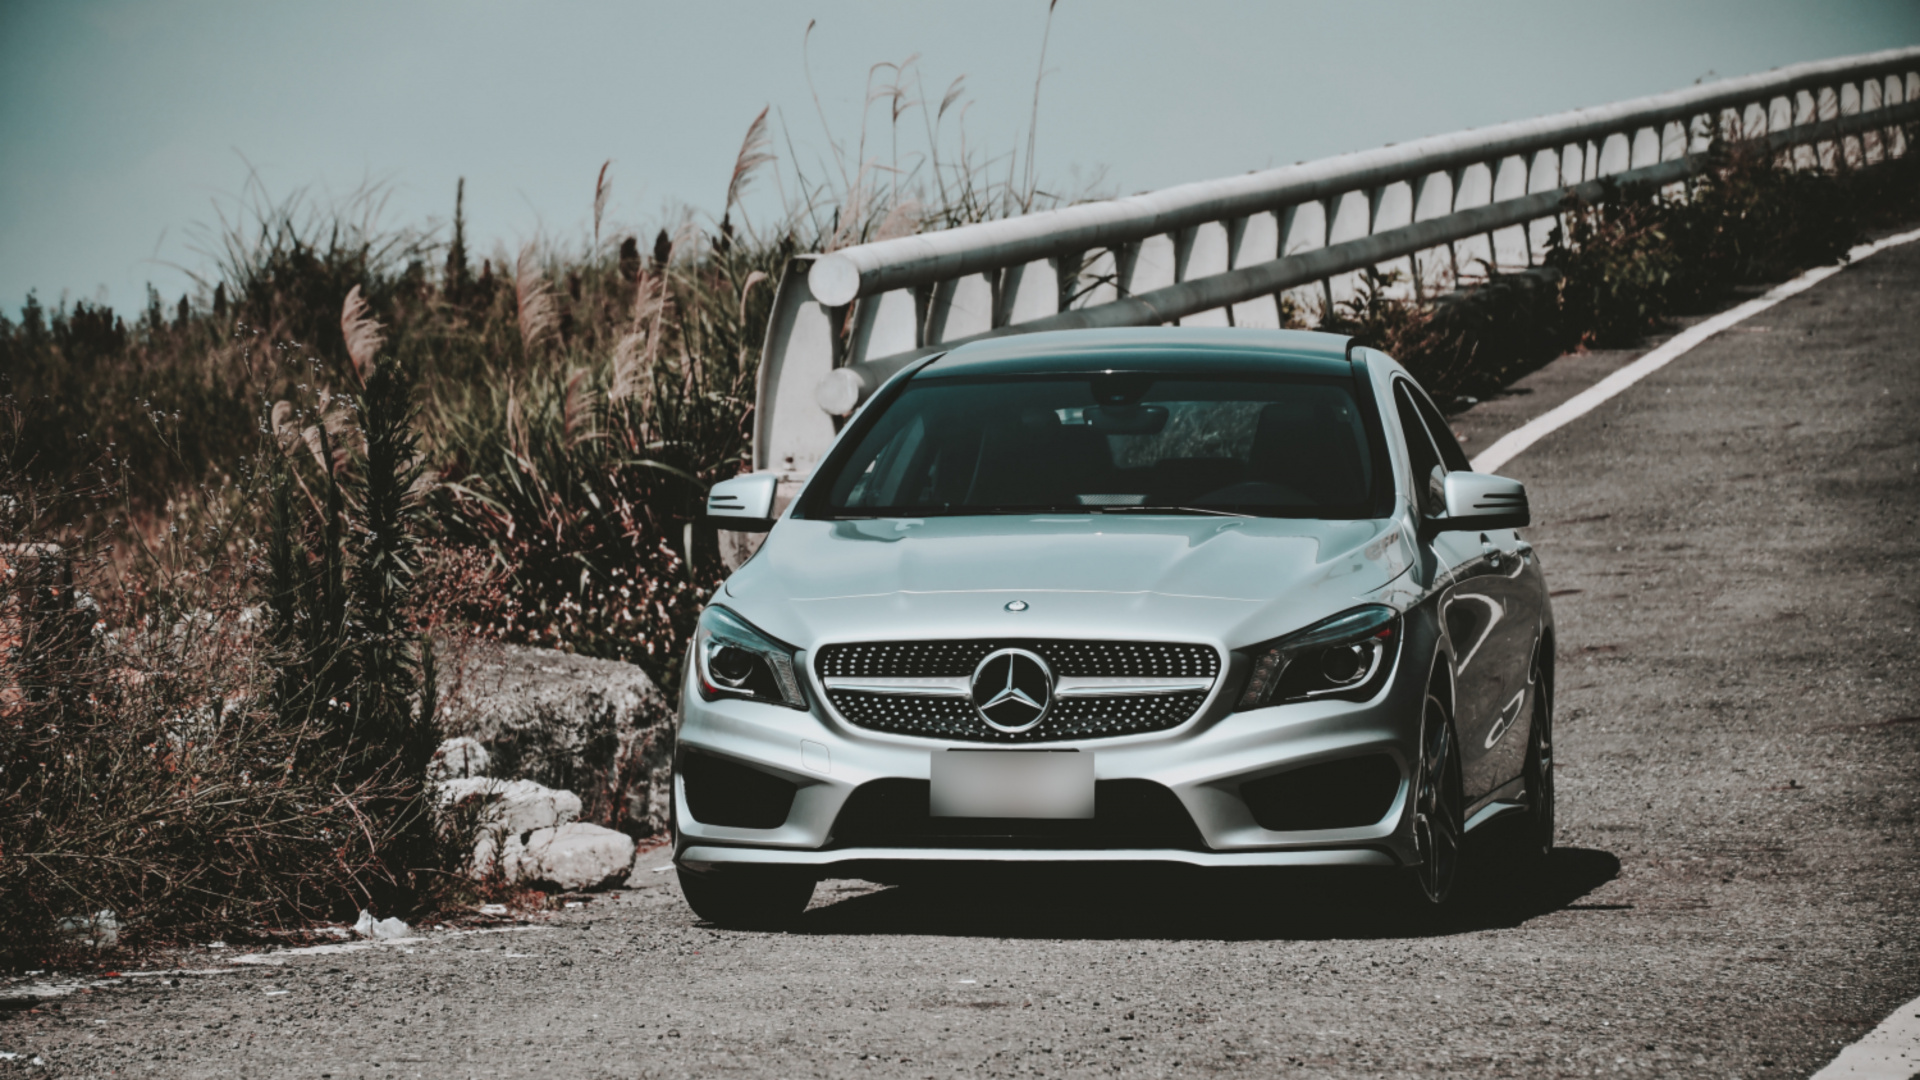 White Mercedes Benz c Class Parked on Gray Sand During Daytime. Wallpaper in 1920x1080 Resolution